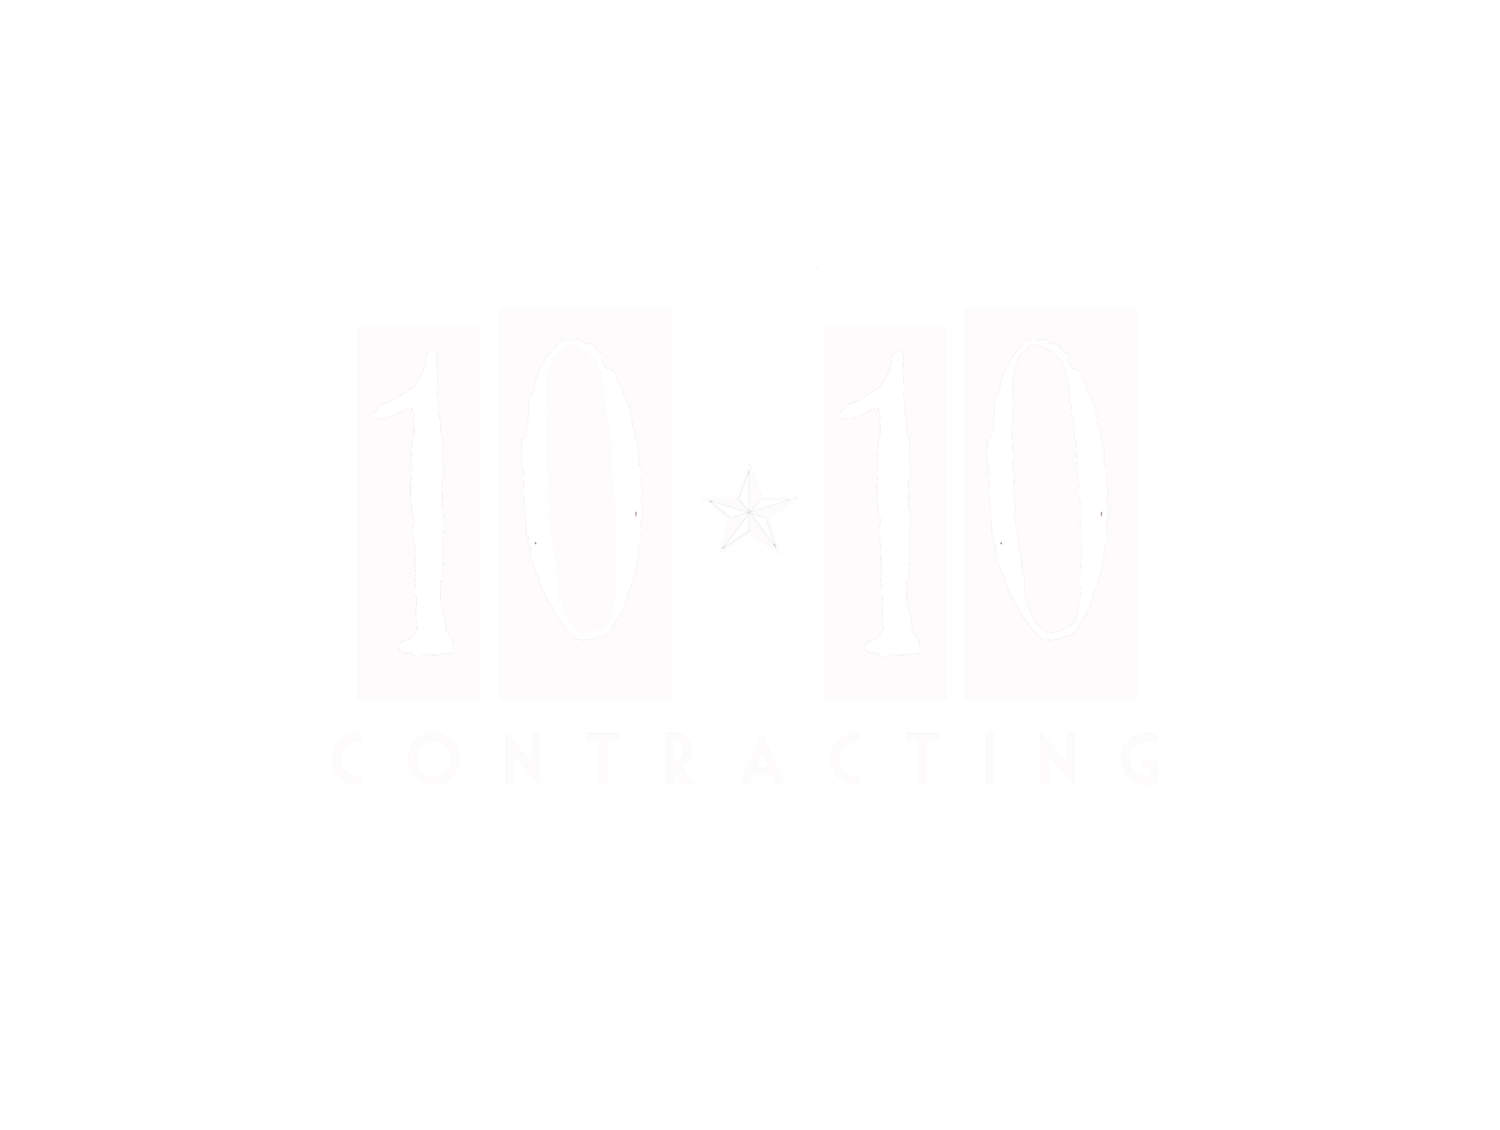 10.10 Contracting